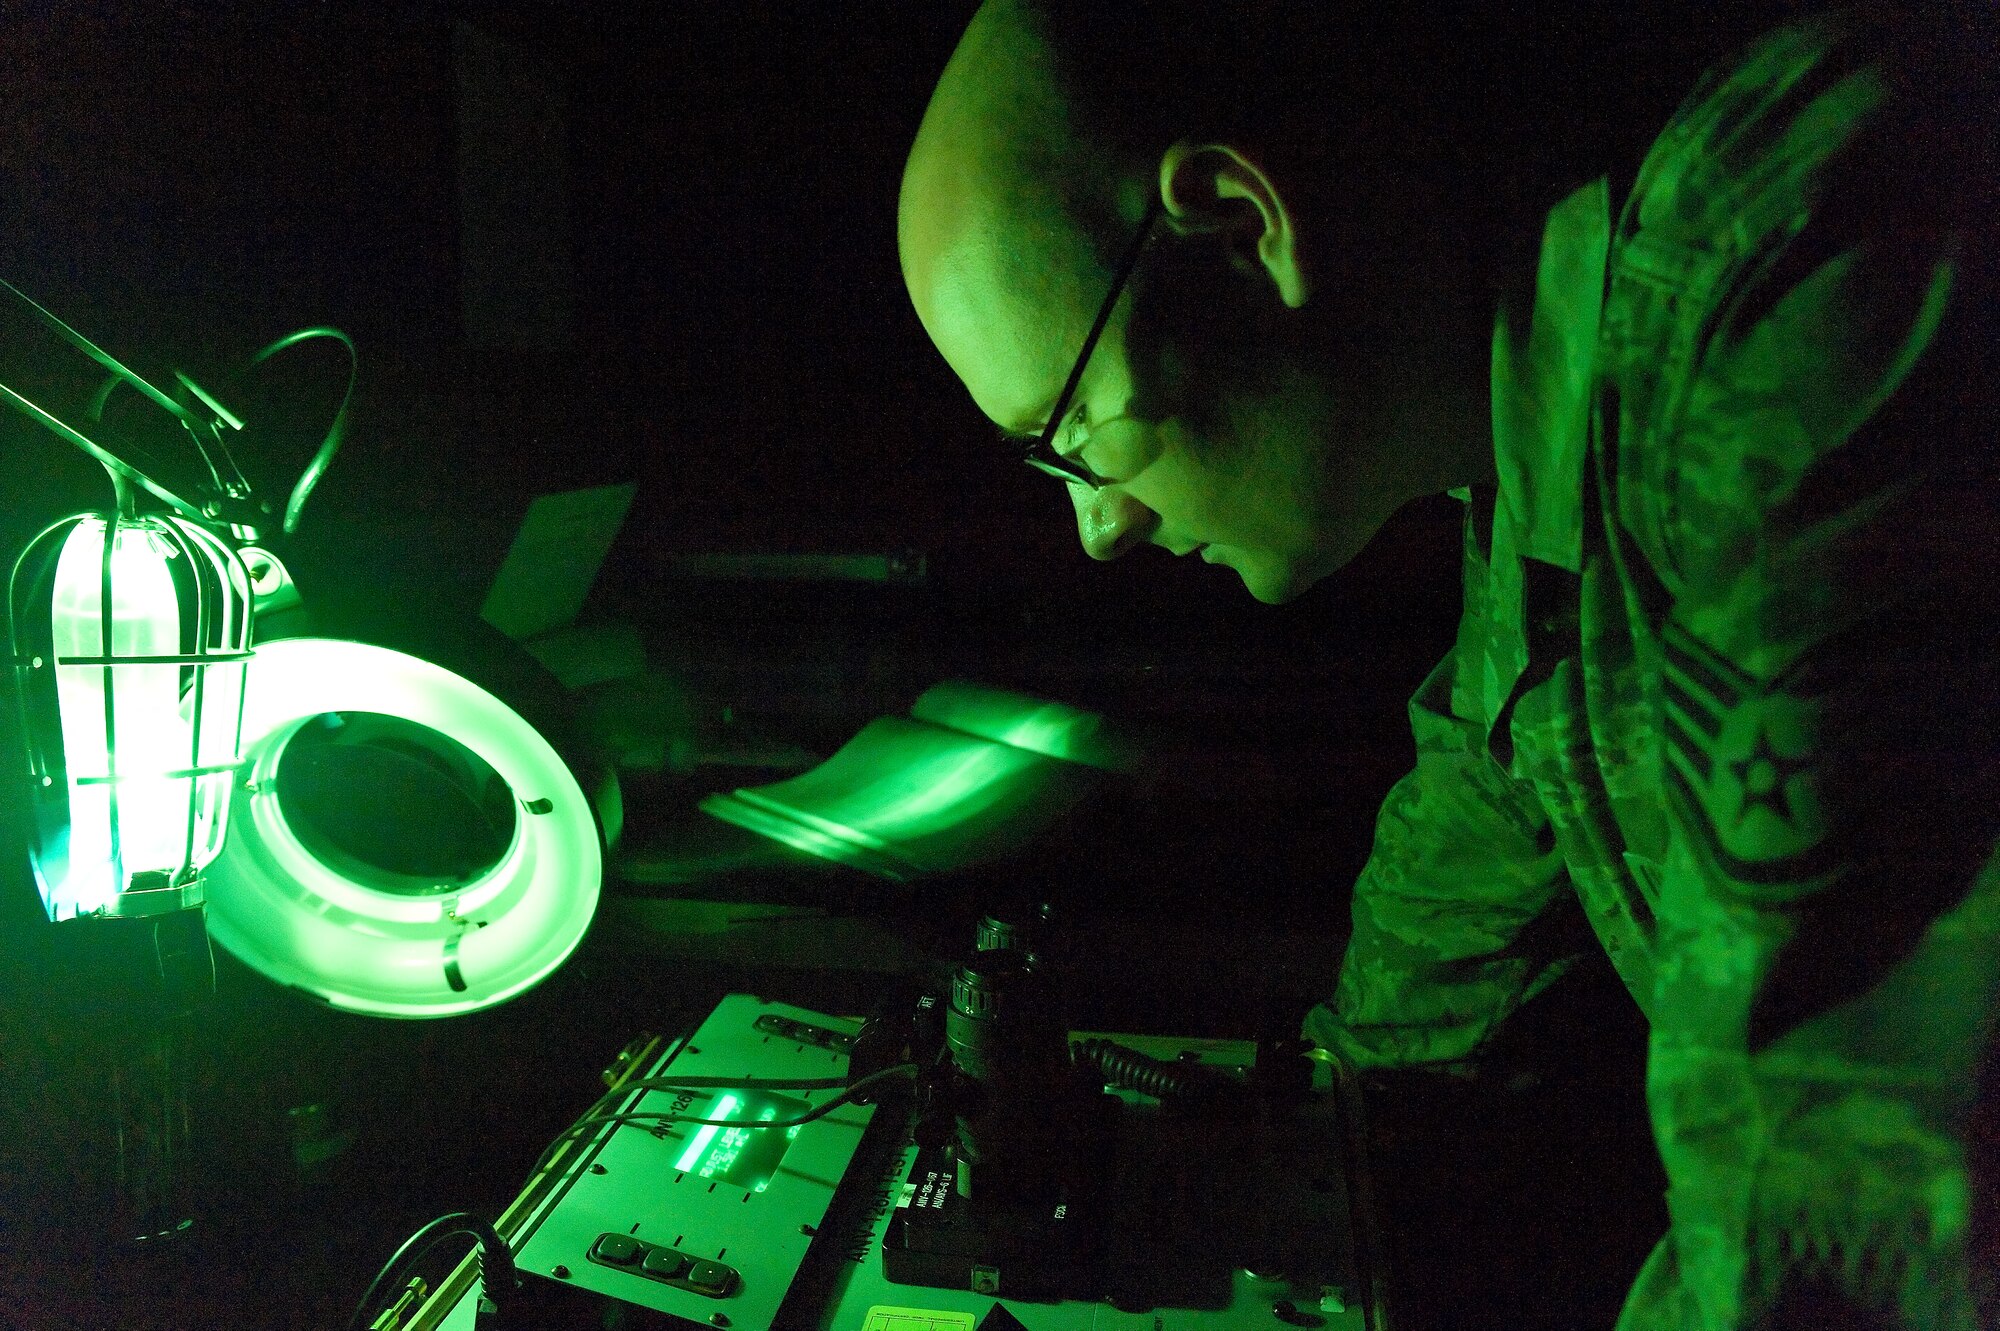 Staff Sgt. Jerry Baker, 436th Operations Support Squadron Aircrew Flight Equipment craftsman, examines a pair of night vision goggles July 7, 2011 at Dover Air Force Base, Del. Night vision goggles must be inspected for defects every six months.(U.S. Air Force photo by Roland Balik)